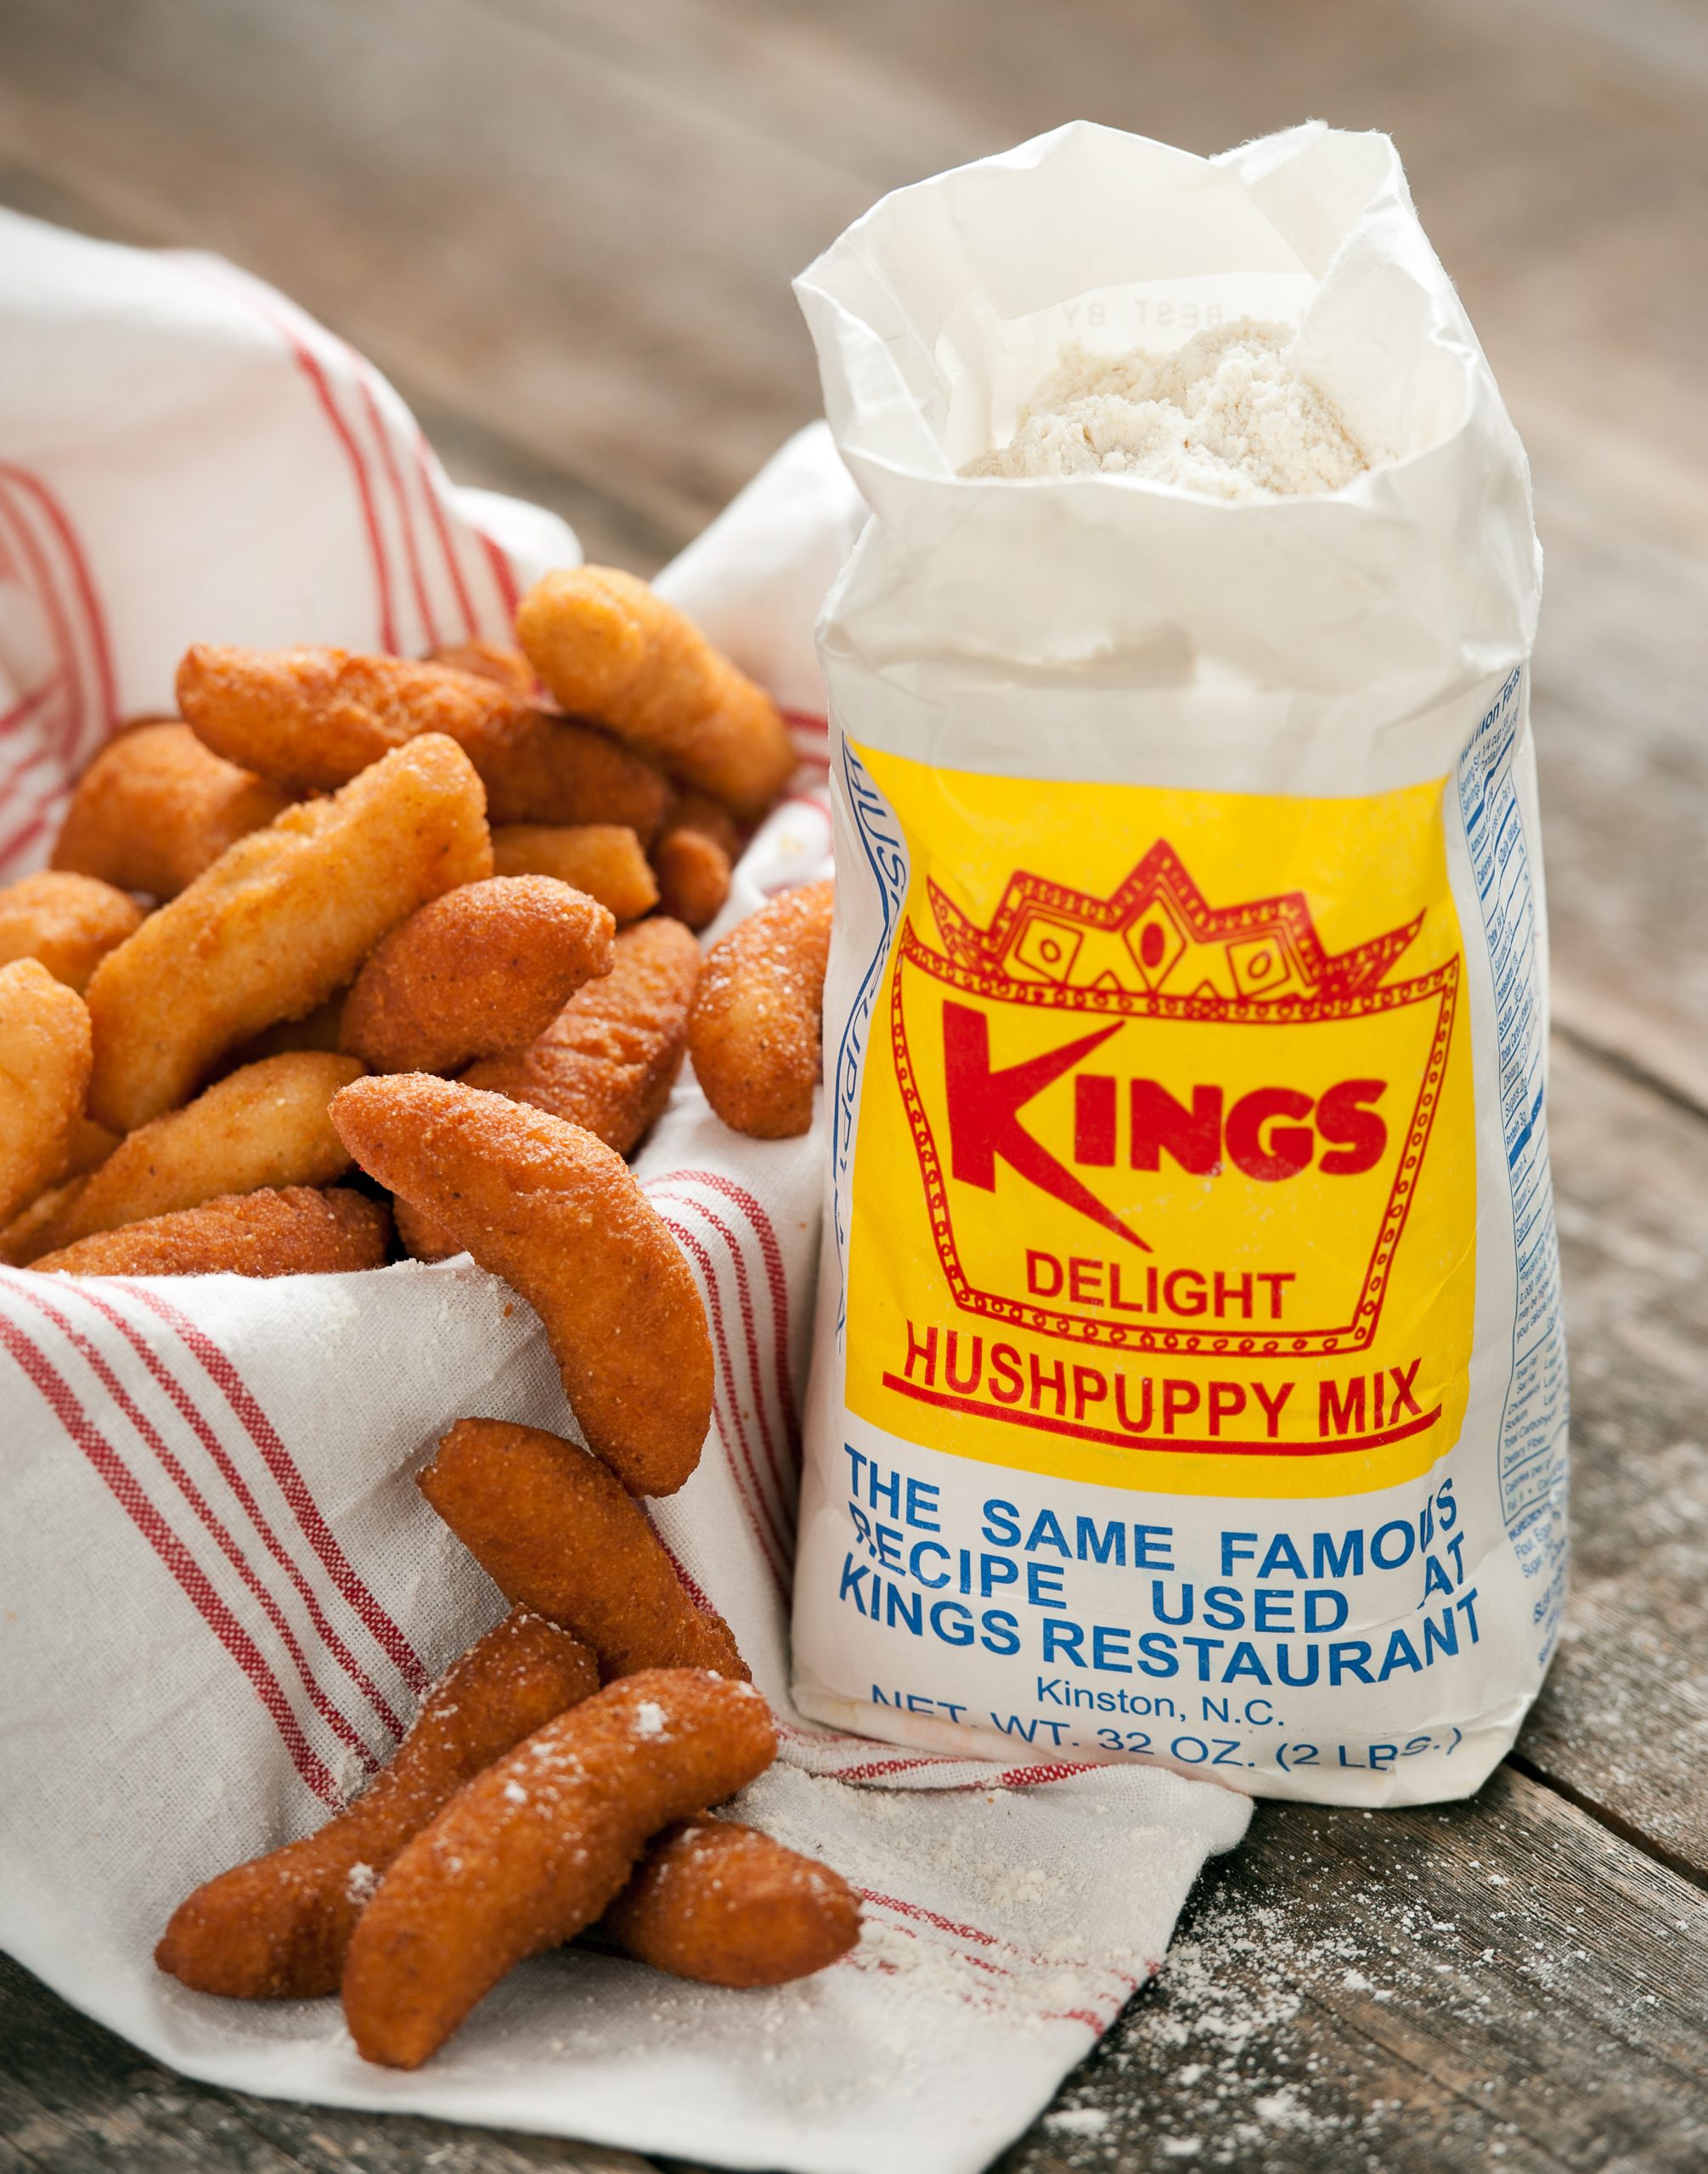 King's Delight Hush Puppy Mix $6.99 - Kings